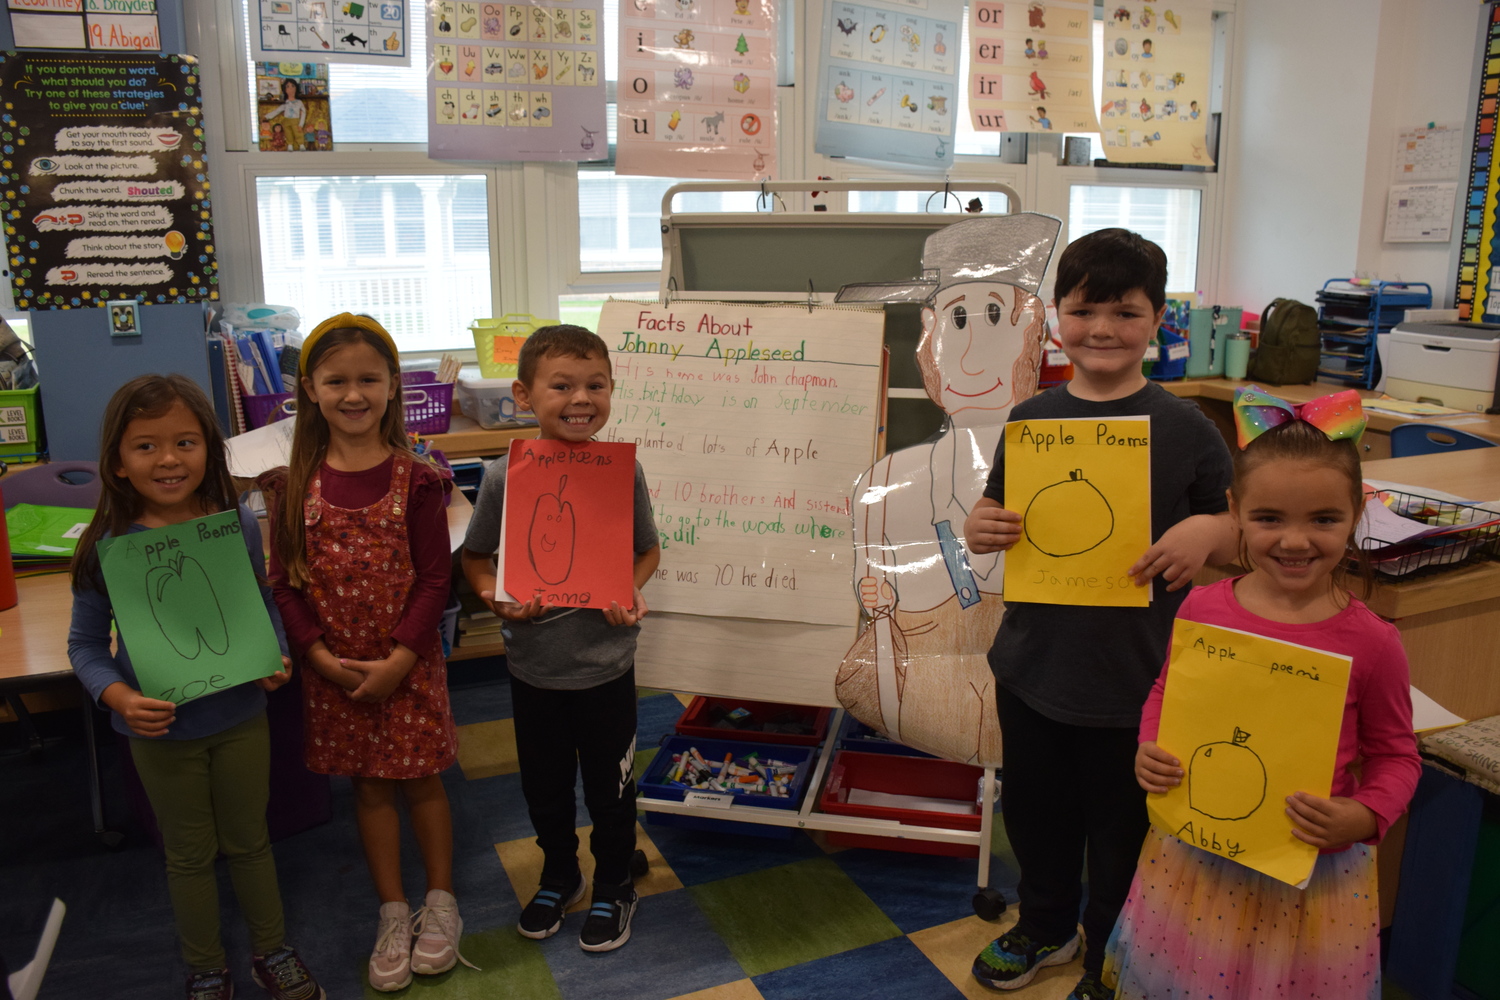 First graders in Michelle Grausso’s class at Tuttle Avenue Elementary School learned about Johnny Appleseed and wrote and studied apple poems. The poetry unit integrated all aspects of the school’s curriculum, with facts from literature learned about John Chapman (Johnny Appleseed), patriotic tunes, information about the apple’s nutritional value, learning about the apple’s life cycles and seasonal changes, songs learned about apples and counting activities. The unit culminated with the students’ reading poetry and singing about apples. COURTESY EASTPORT-SOUTH MANOR SCHOOL DISTRICT